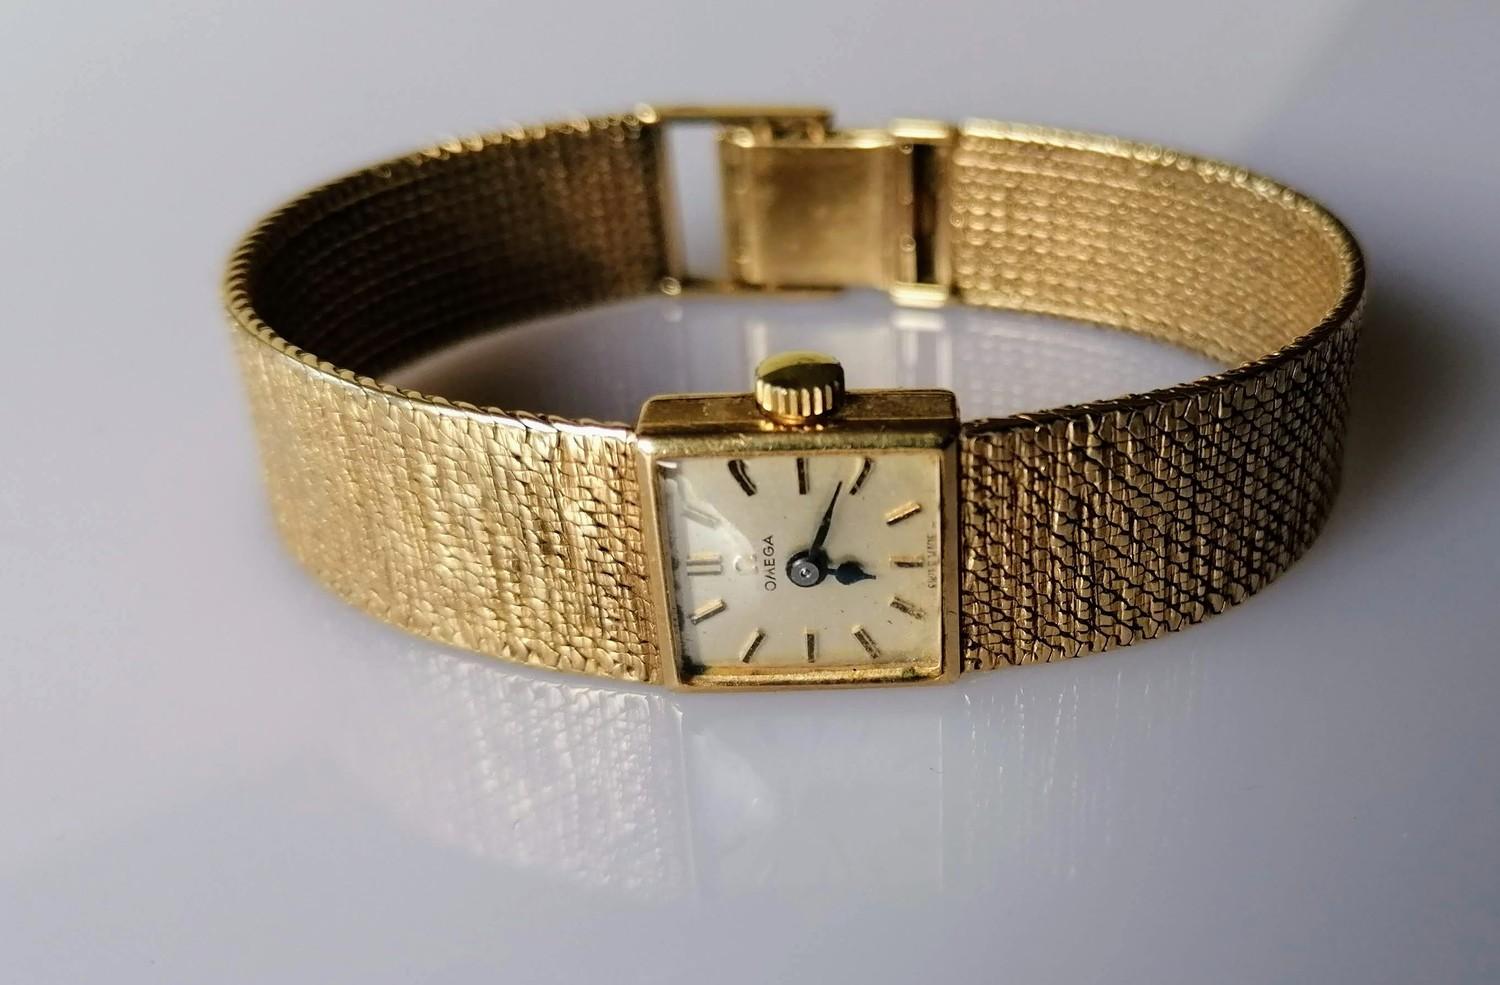 A mid-century Omega ladies dress watch with a gold case and bark-effect bracelet strap, in working